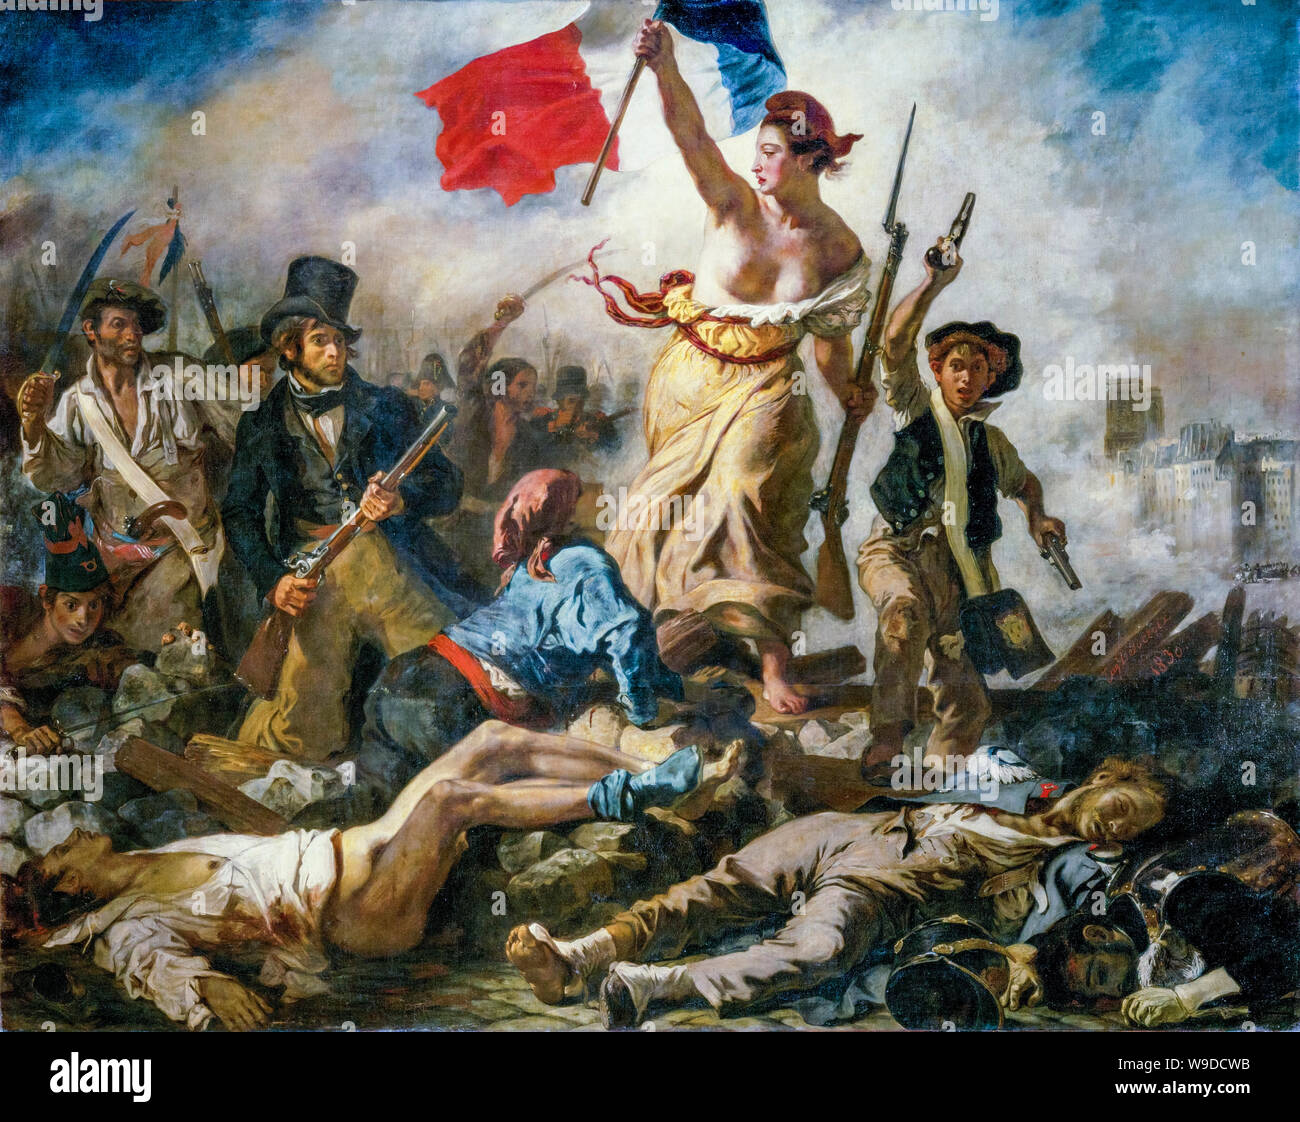 Eugène Delacroix, Liberty Leading the People, French revolution painting, 1830 Stock Photo